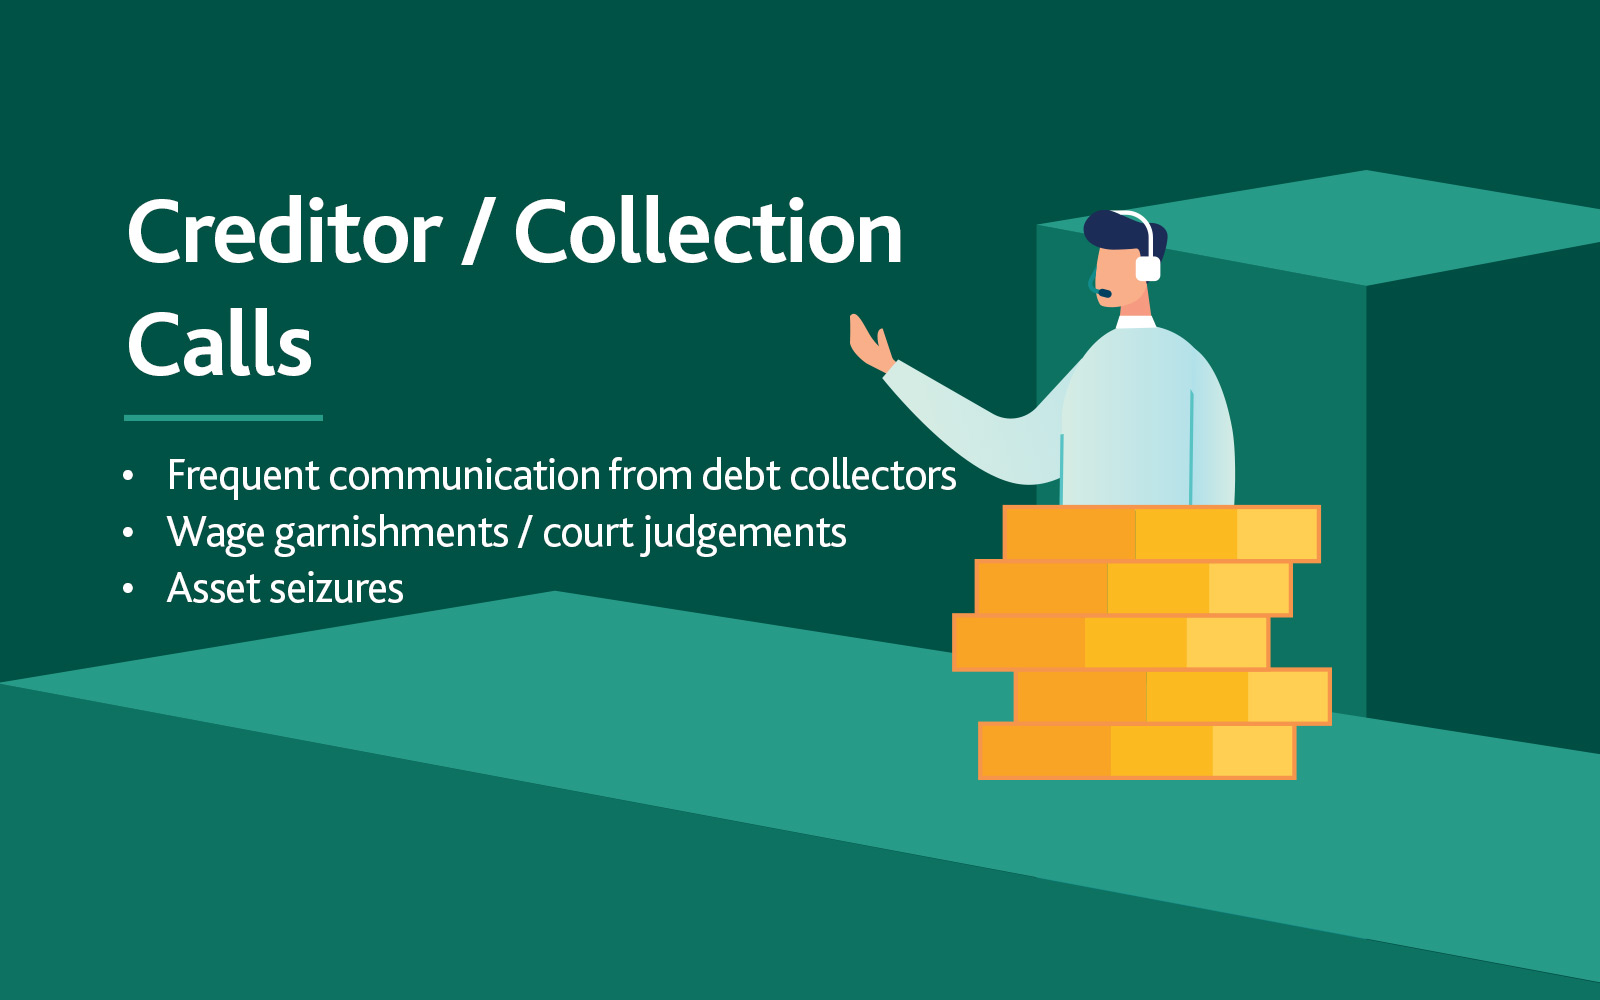 "Creditor/Collection Calls" headline with bulletpoints underneath: "Frequent communication from debt collectors, wage garnishments/court judgements, and asset seizures." A cartoon person wearing a headset on top of money in the background.